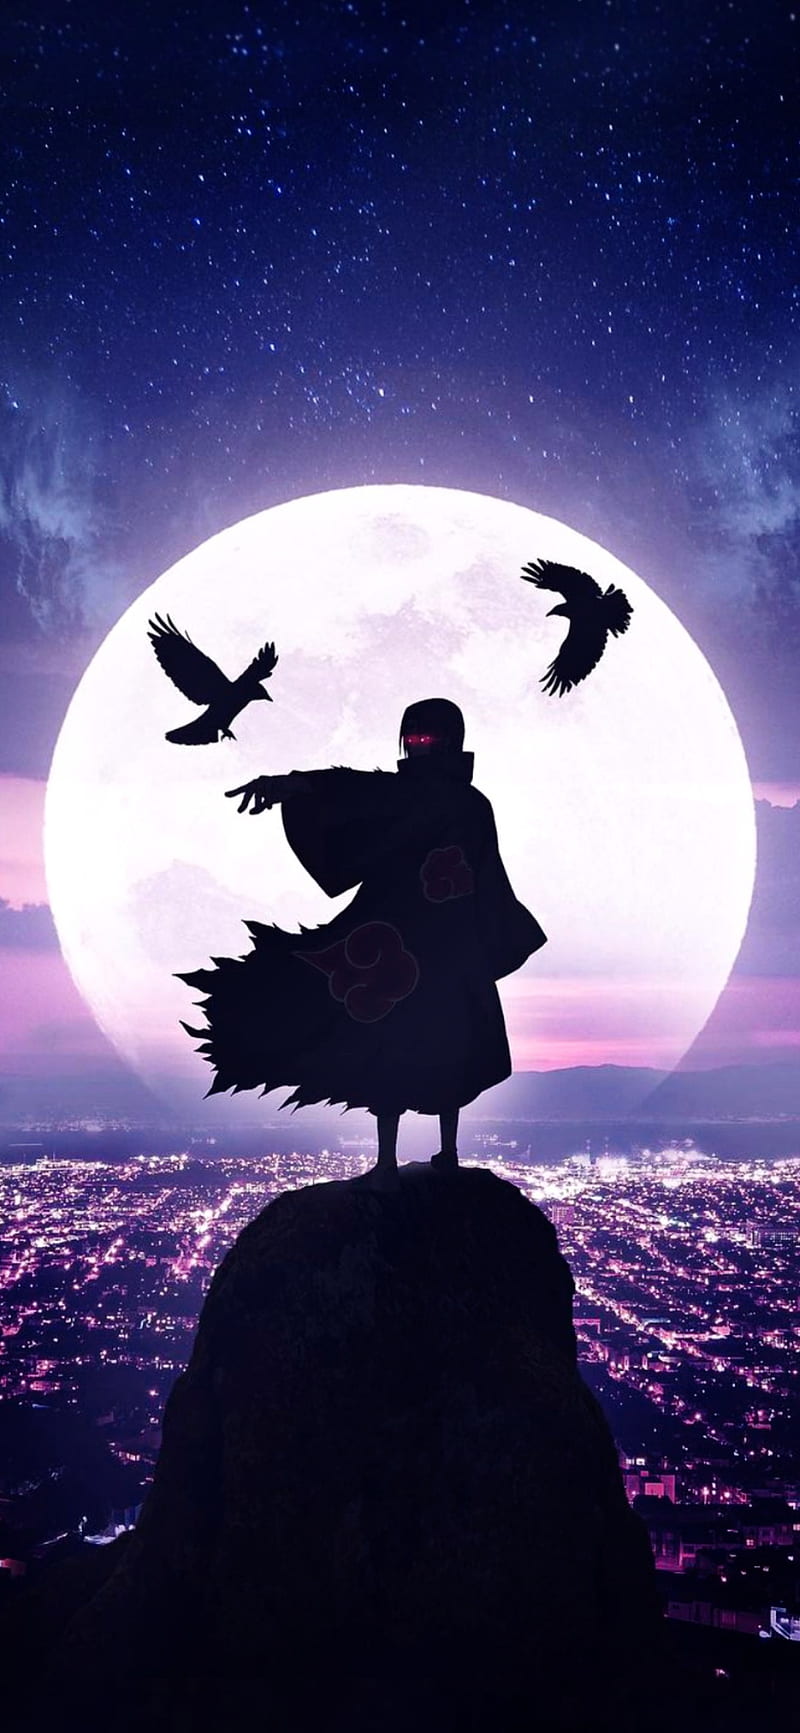 Itachi at the moon wallpaper by Narutowpp  Download on ZEDGE  8597